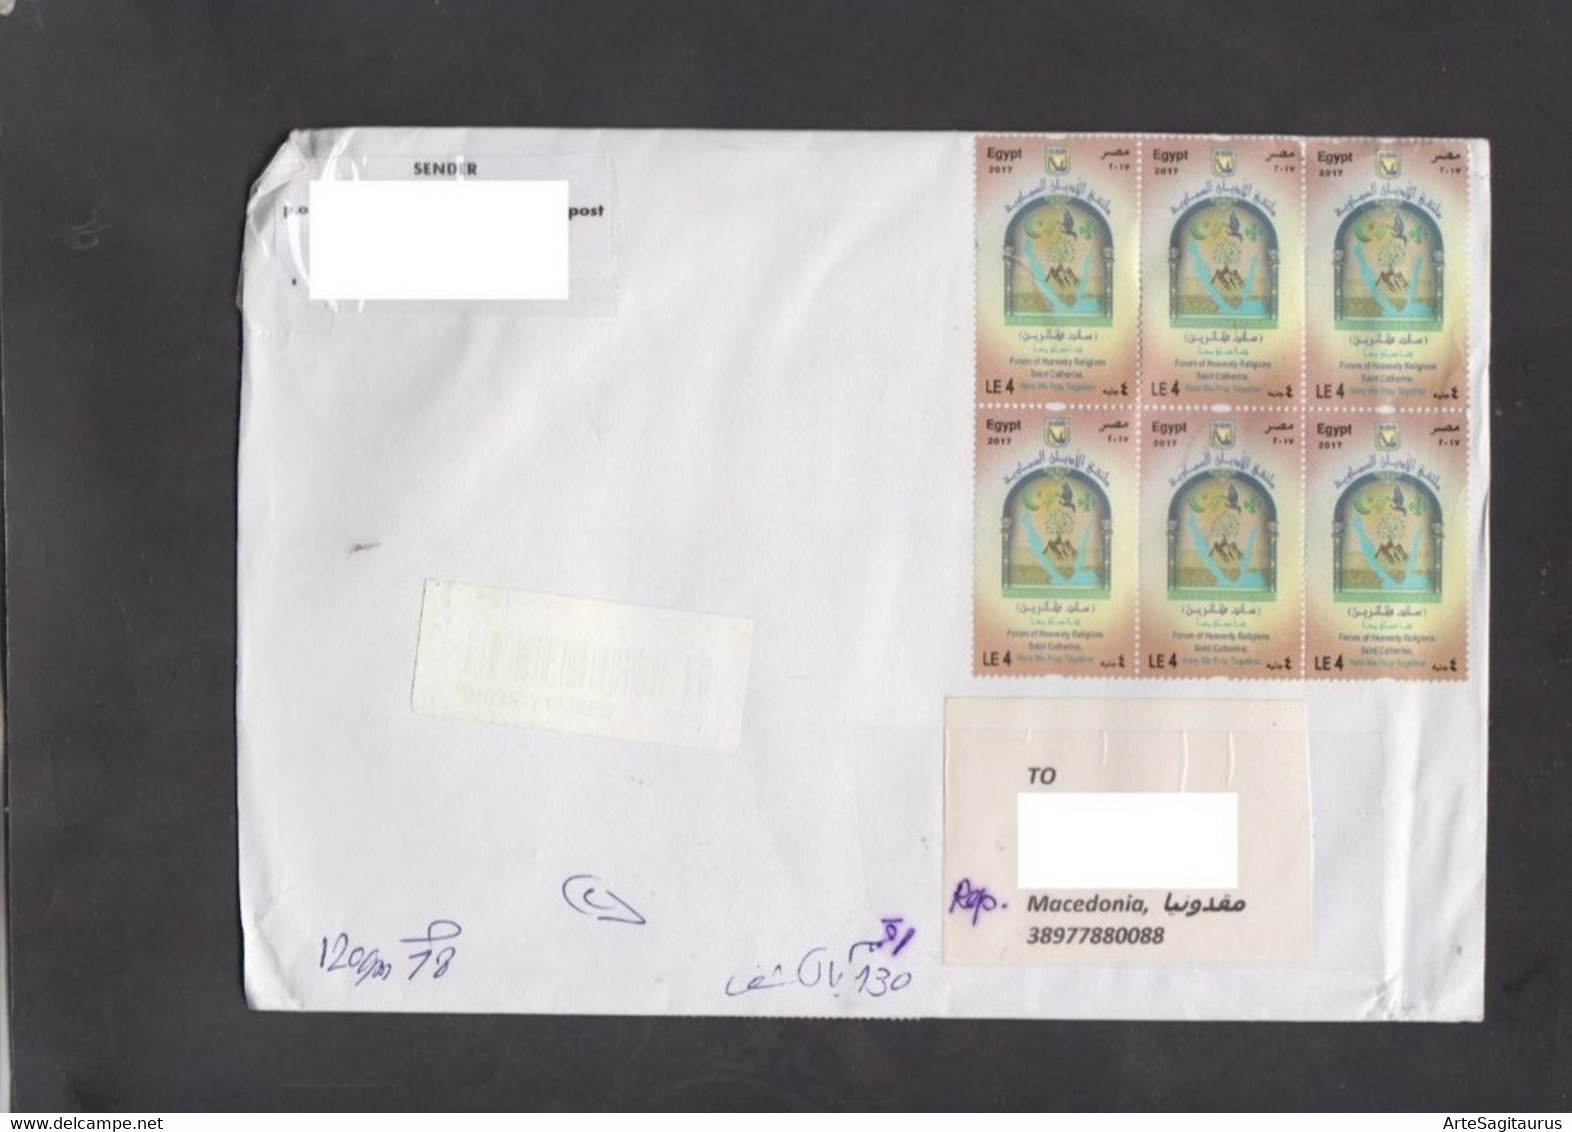 EGYPT, R-COVER, REPUBLIC OF MACEDONIA, Religion, Islam  (002) - Lettres & Documents